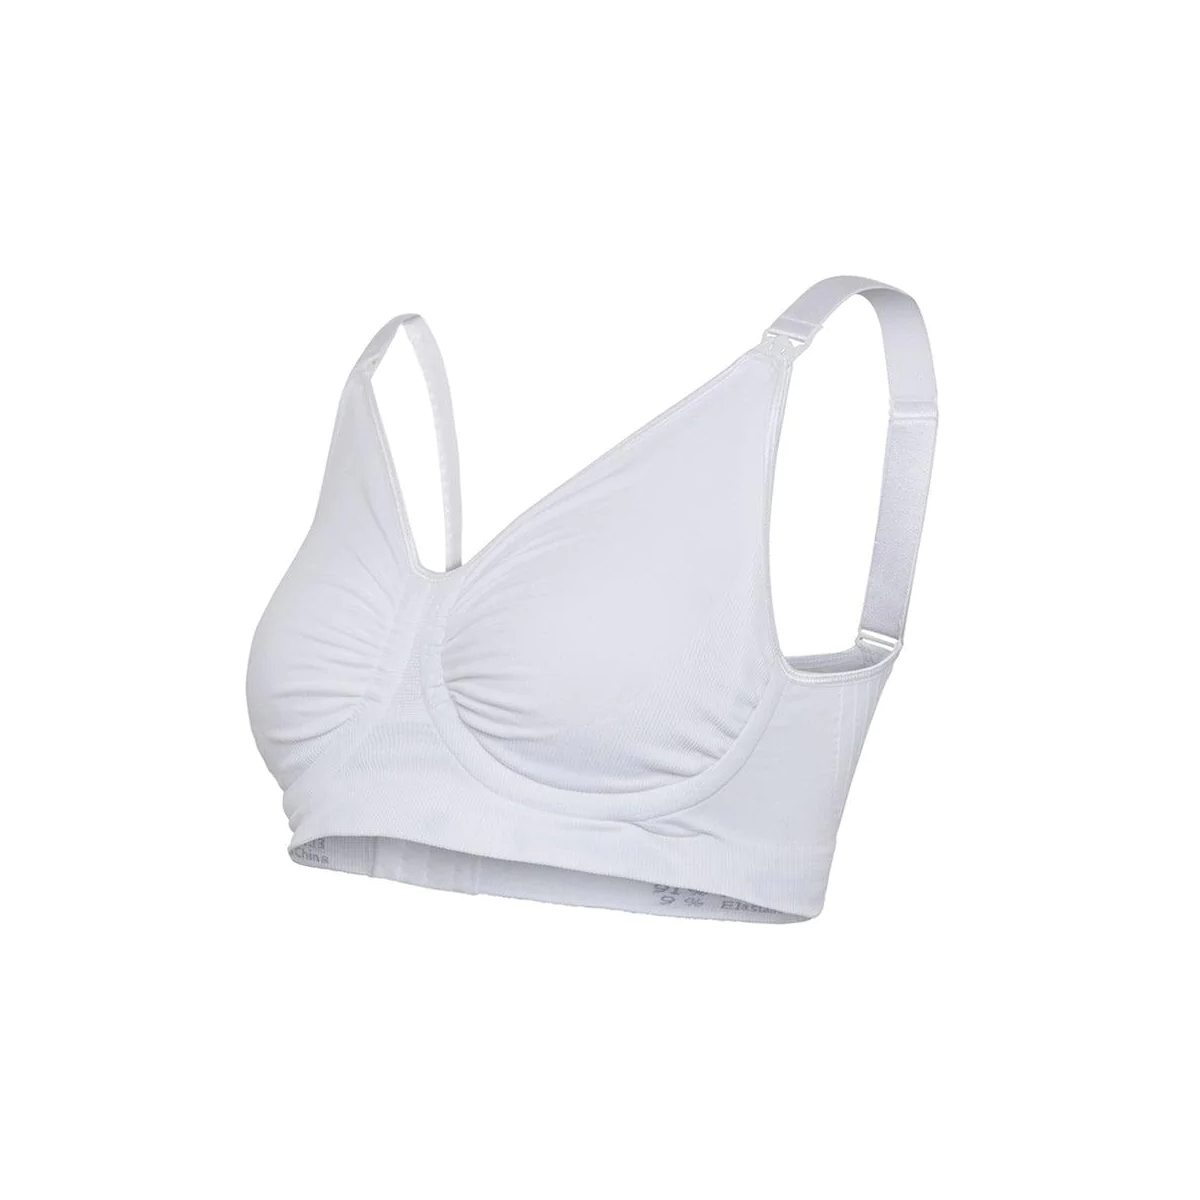 Carriwell Maternity & Nursing Bra with Carri-Gel Support-White (Size - X